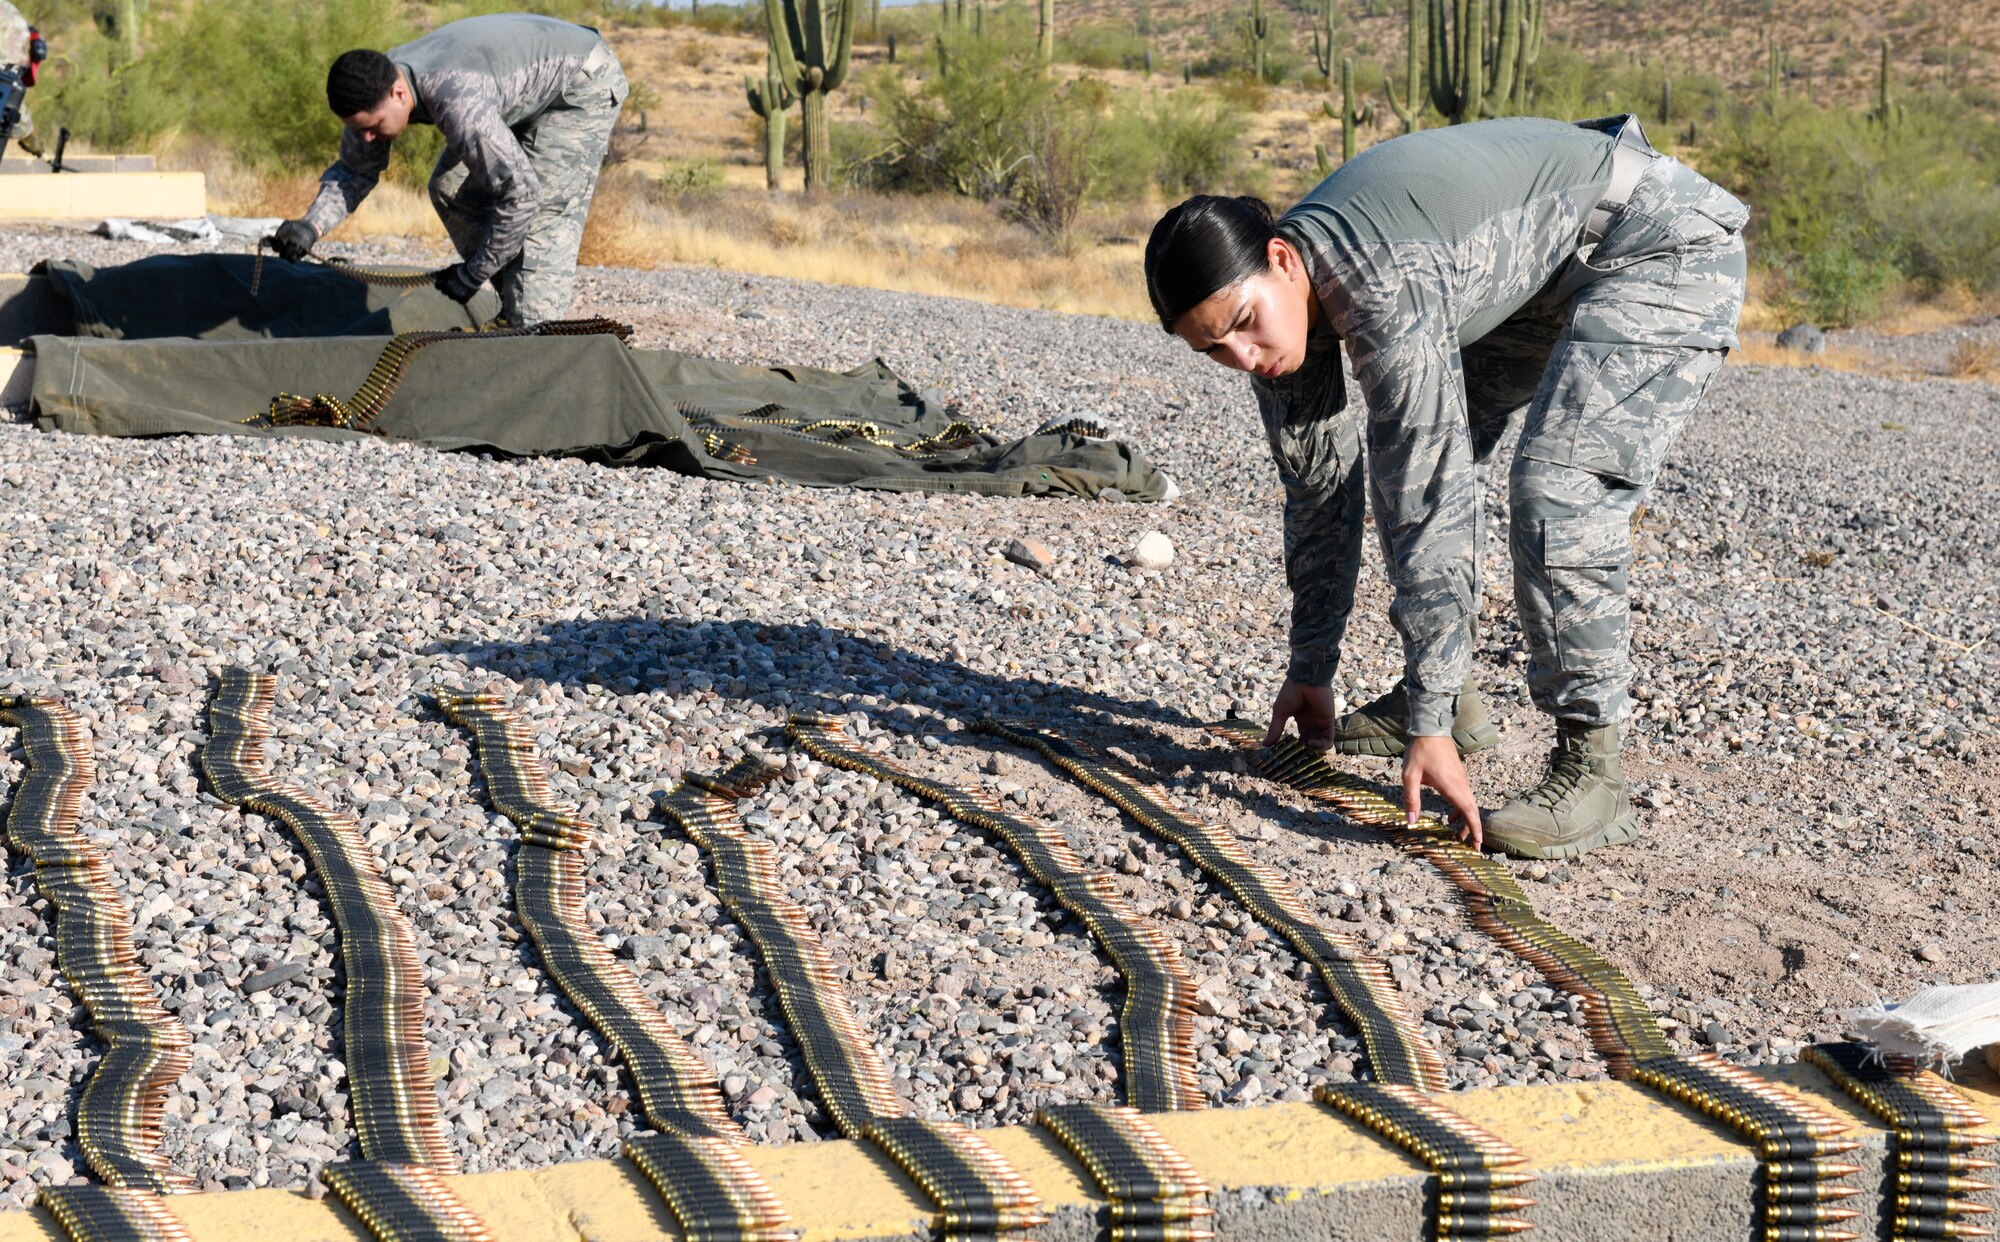 Airman 1st Class Ruth Salgado, 56th Security Forces Squadron installation entry controller, prepares her ammunition for a M249 squad automatic weapon Sept. 4, 2019, at the Arizona Army National Guard range in Florence, Ariz.